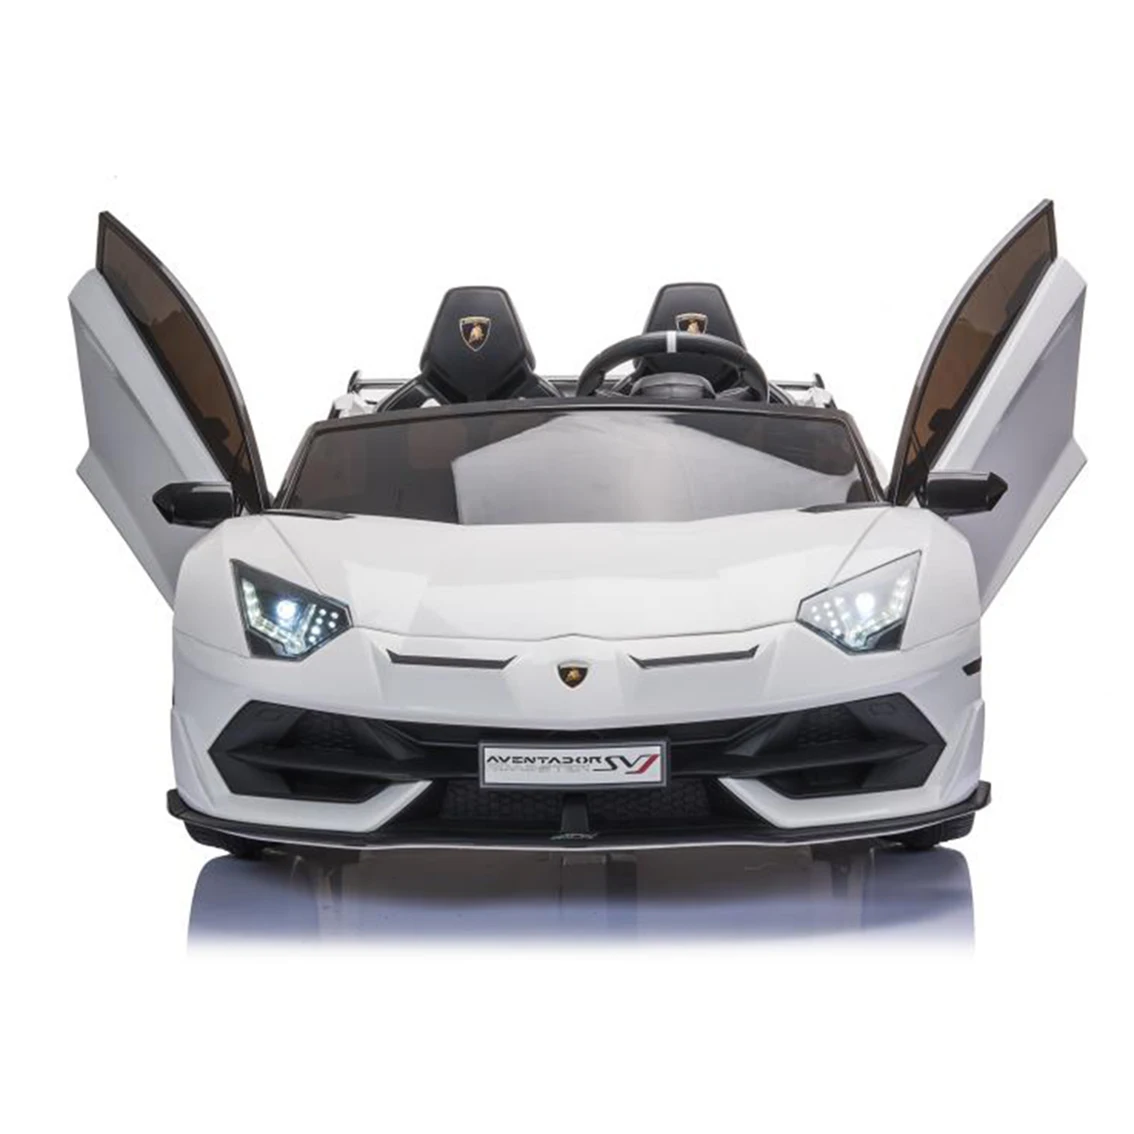 Licensed Lamborghini Aventador Svj Two Seat Electric Car For Kids 3 8 Years  Old - Buy 12v Electric Kids Car,Lamborghini Child Ride On Car,Two Seats  Children Electric Ar Product on 